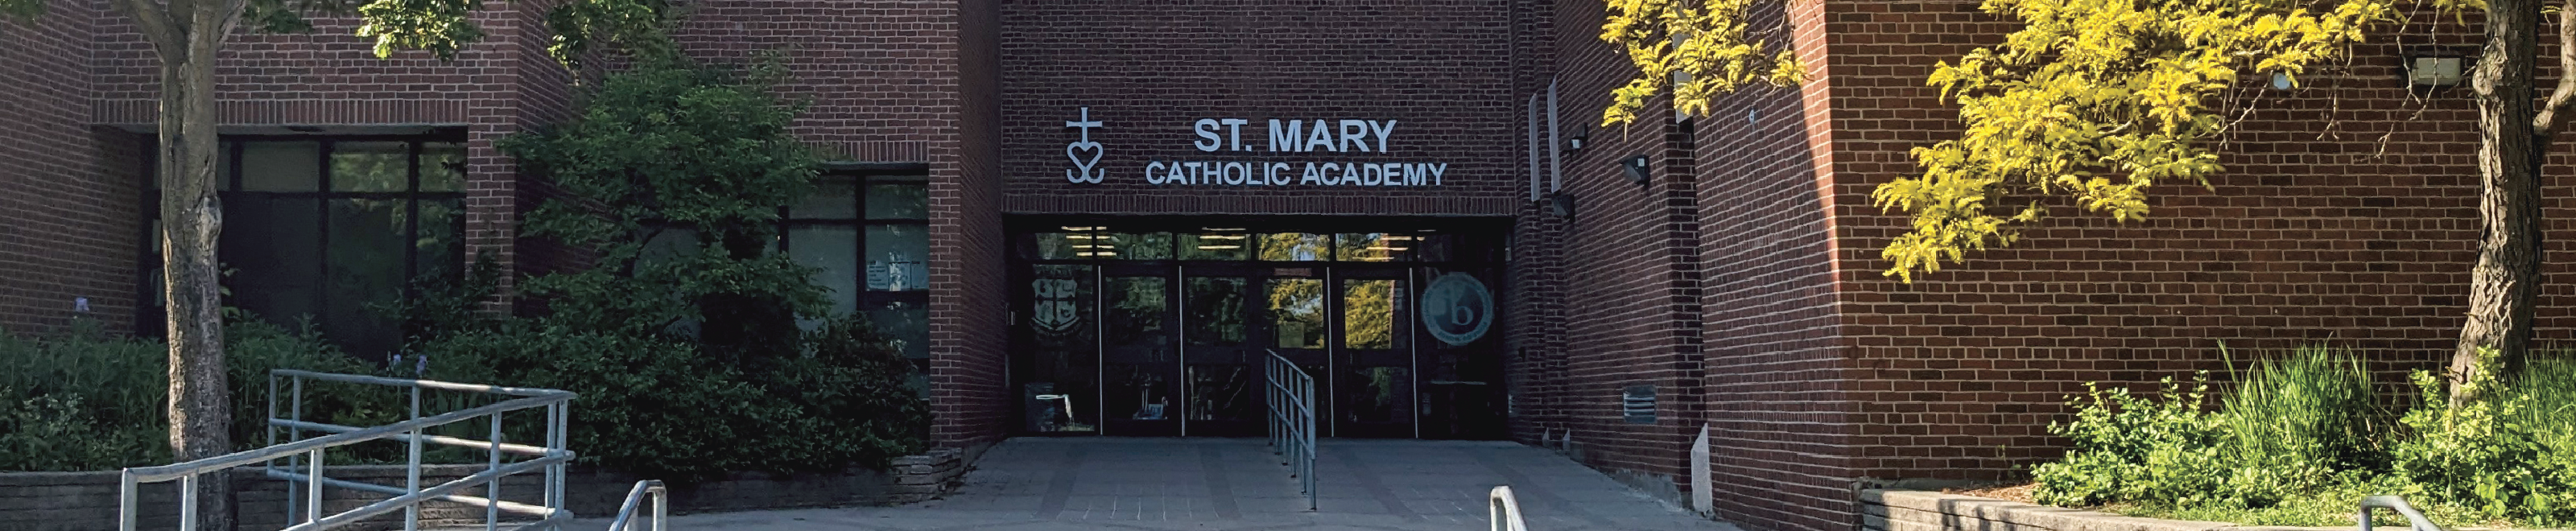 The front entrance of the St. Mary Catholic Academy school building.